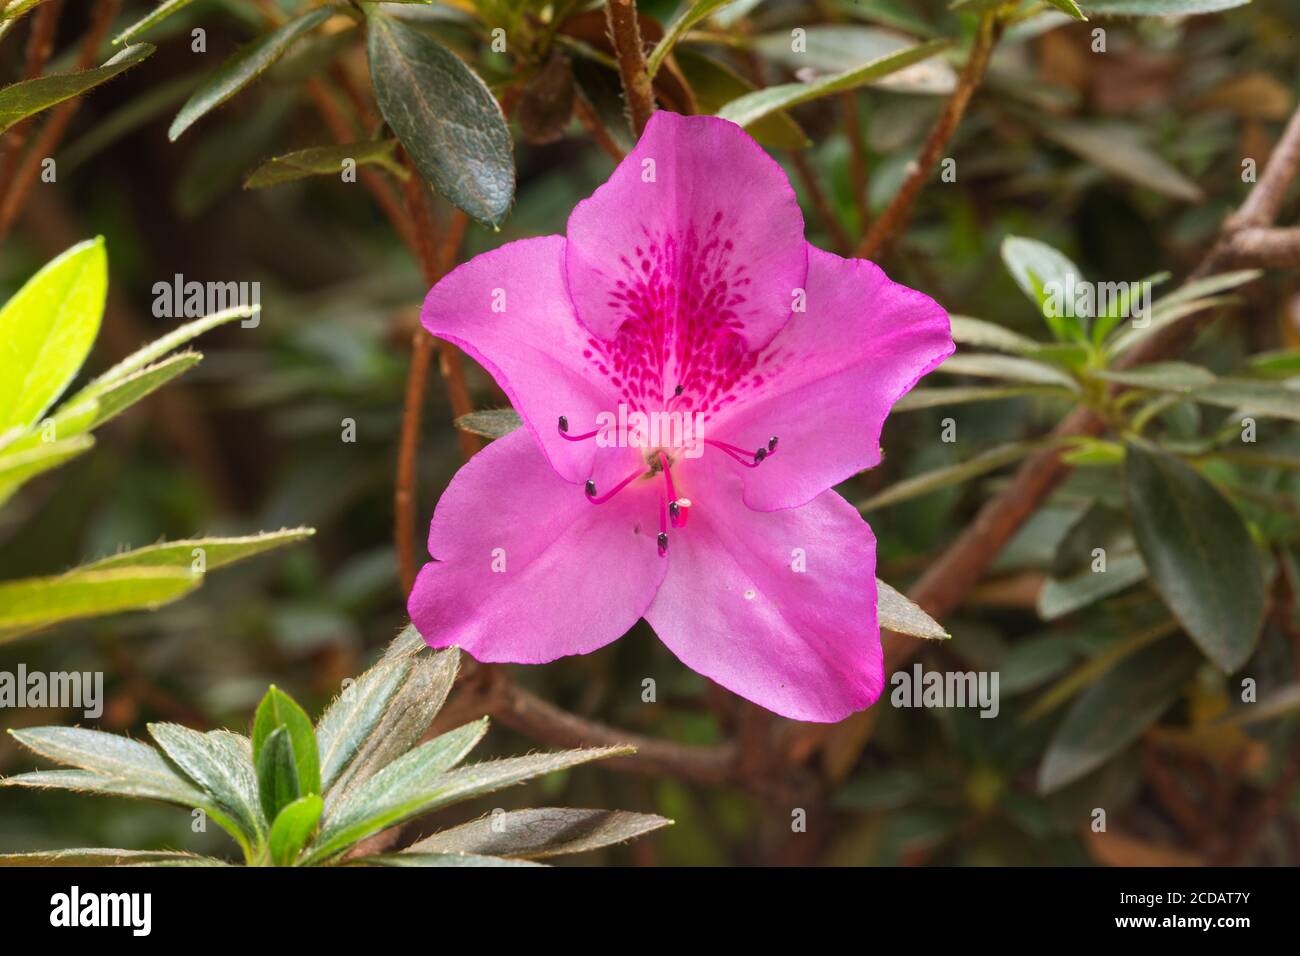 A 'George Taber' azalea, Rhododendron indica, in bloom in the gardens of the Santo Tomas Hotel in Chichicastenango, Guatemala. Stock Photo